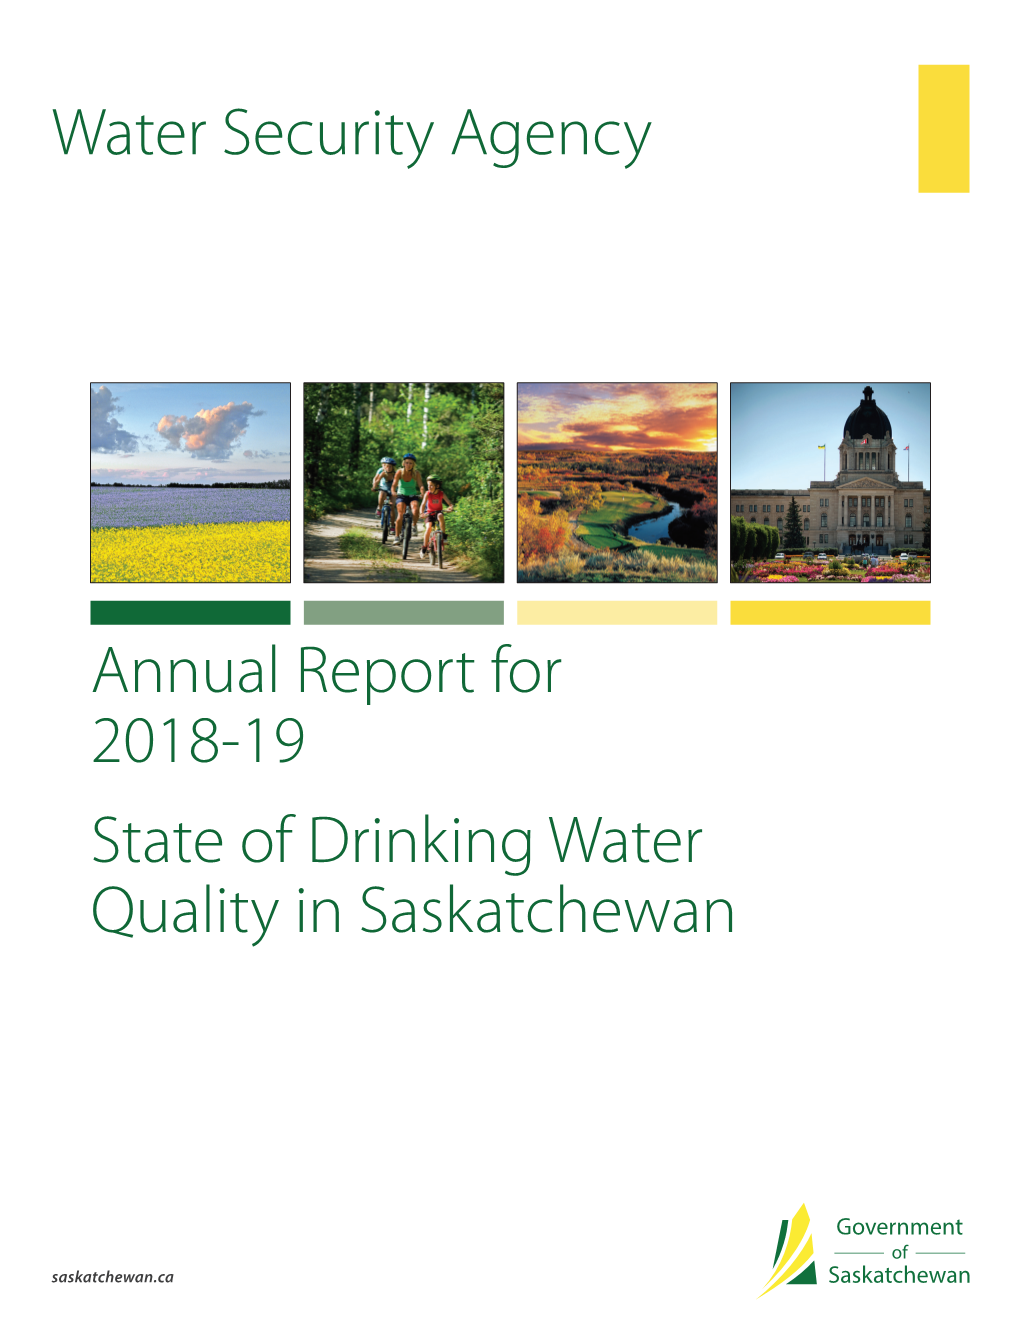 Annual Report for 2018-19 State of Drinking Water Quality in Saskatchewan